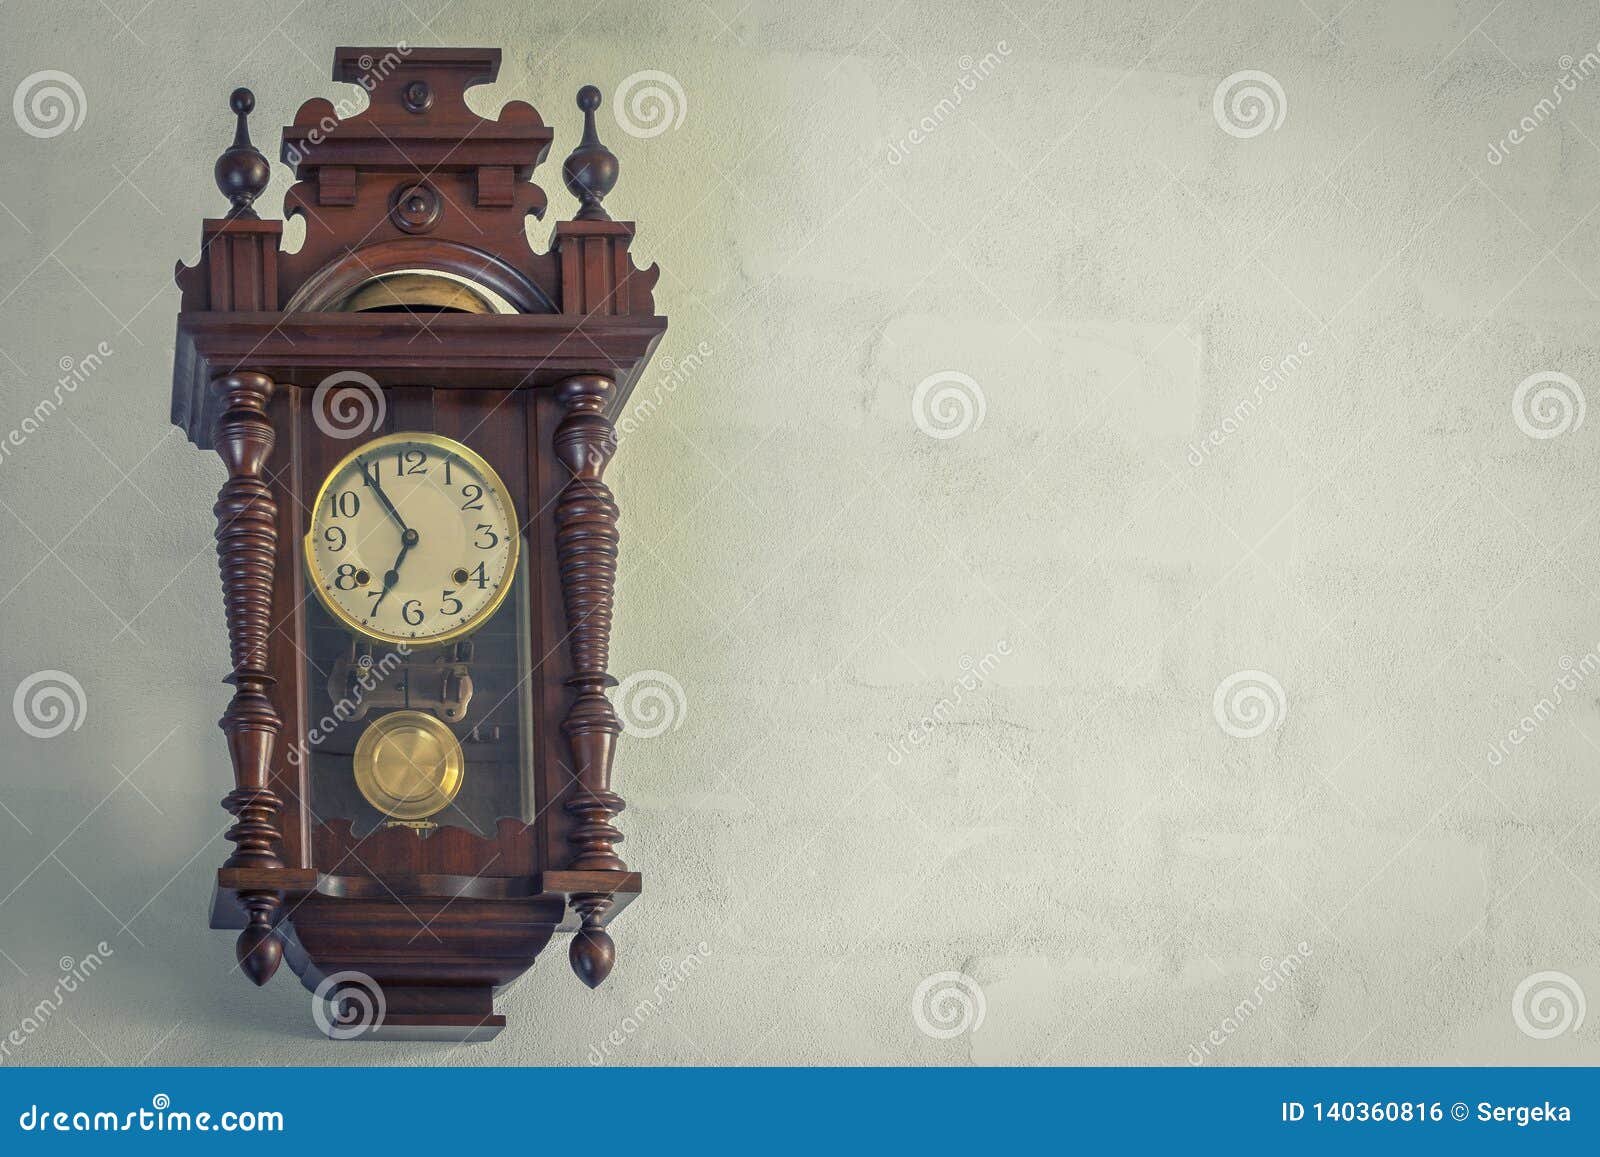 Old Wall Clock Stock Photo Image Of Decorative Furniture 140360816